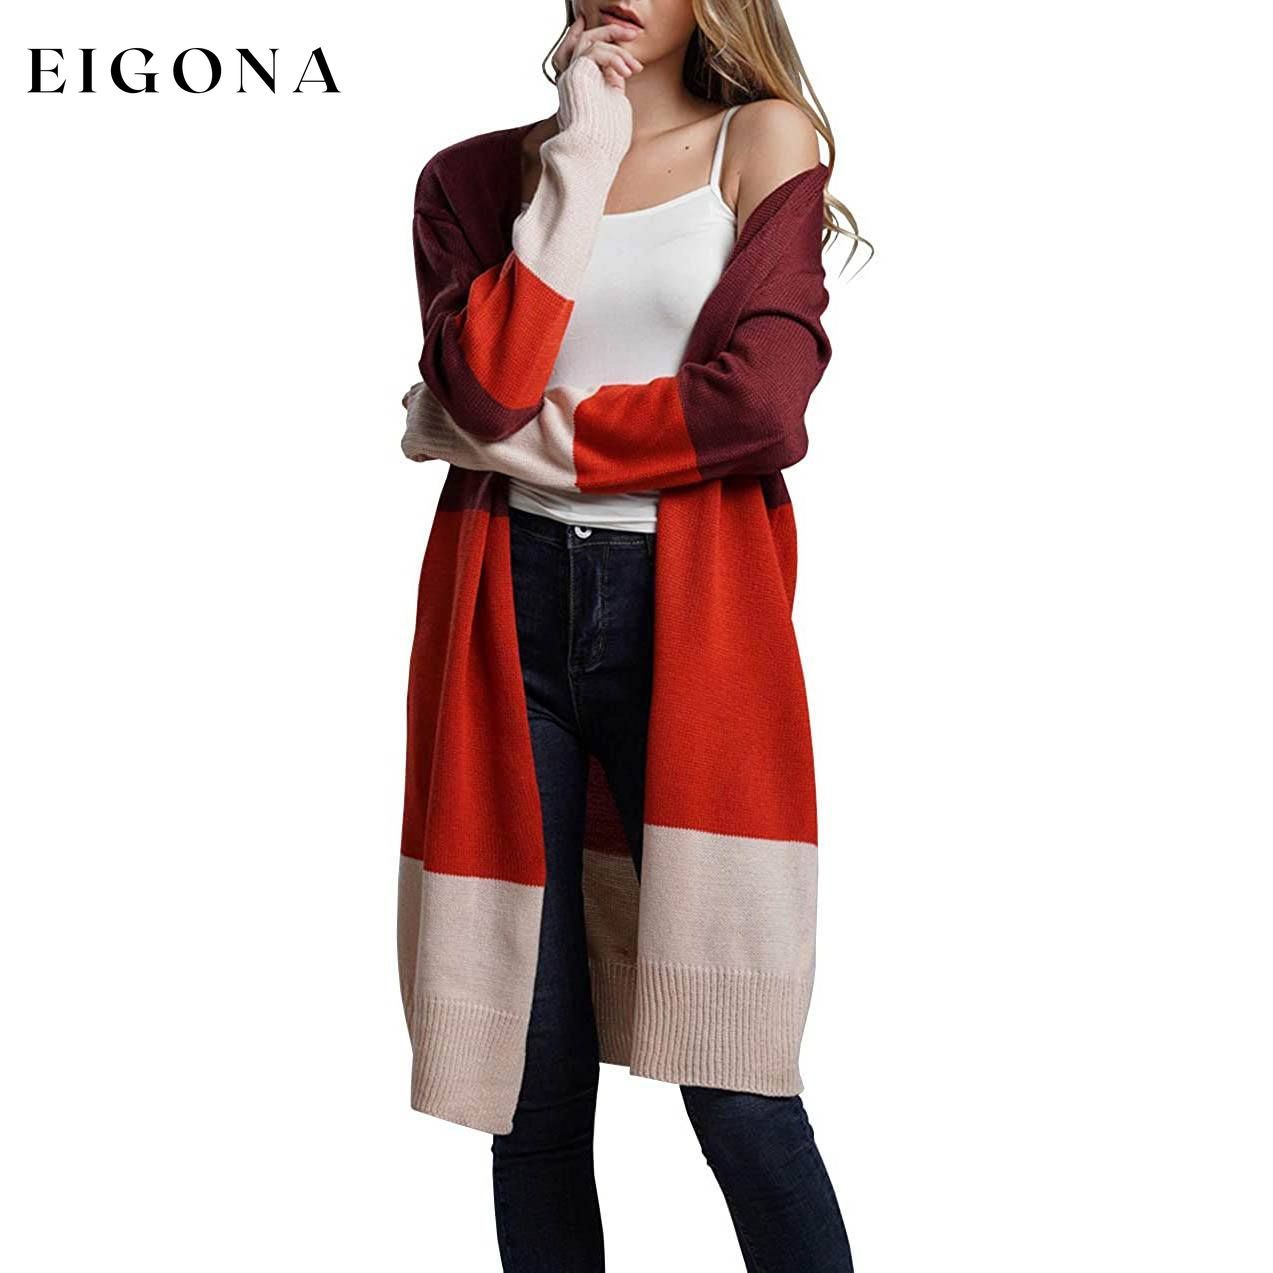 Women's Long Cardigan Sweater Coat Orange __stock:500 Jackets & Coats refund_fee:1200 show-color-swatches